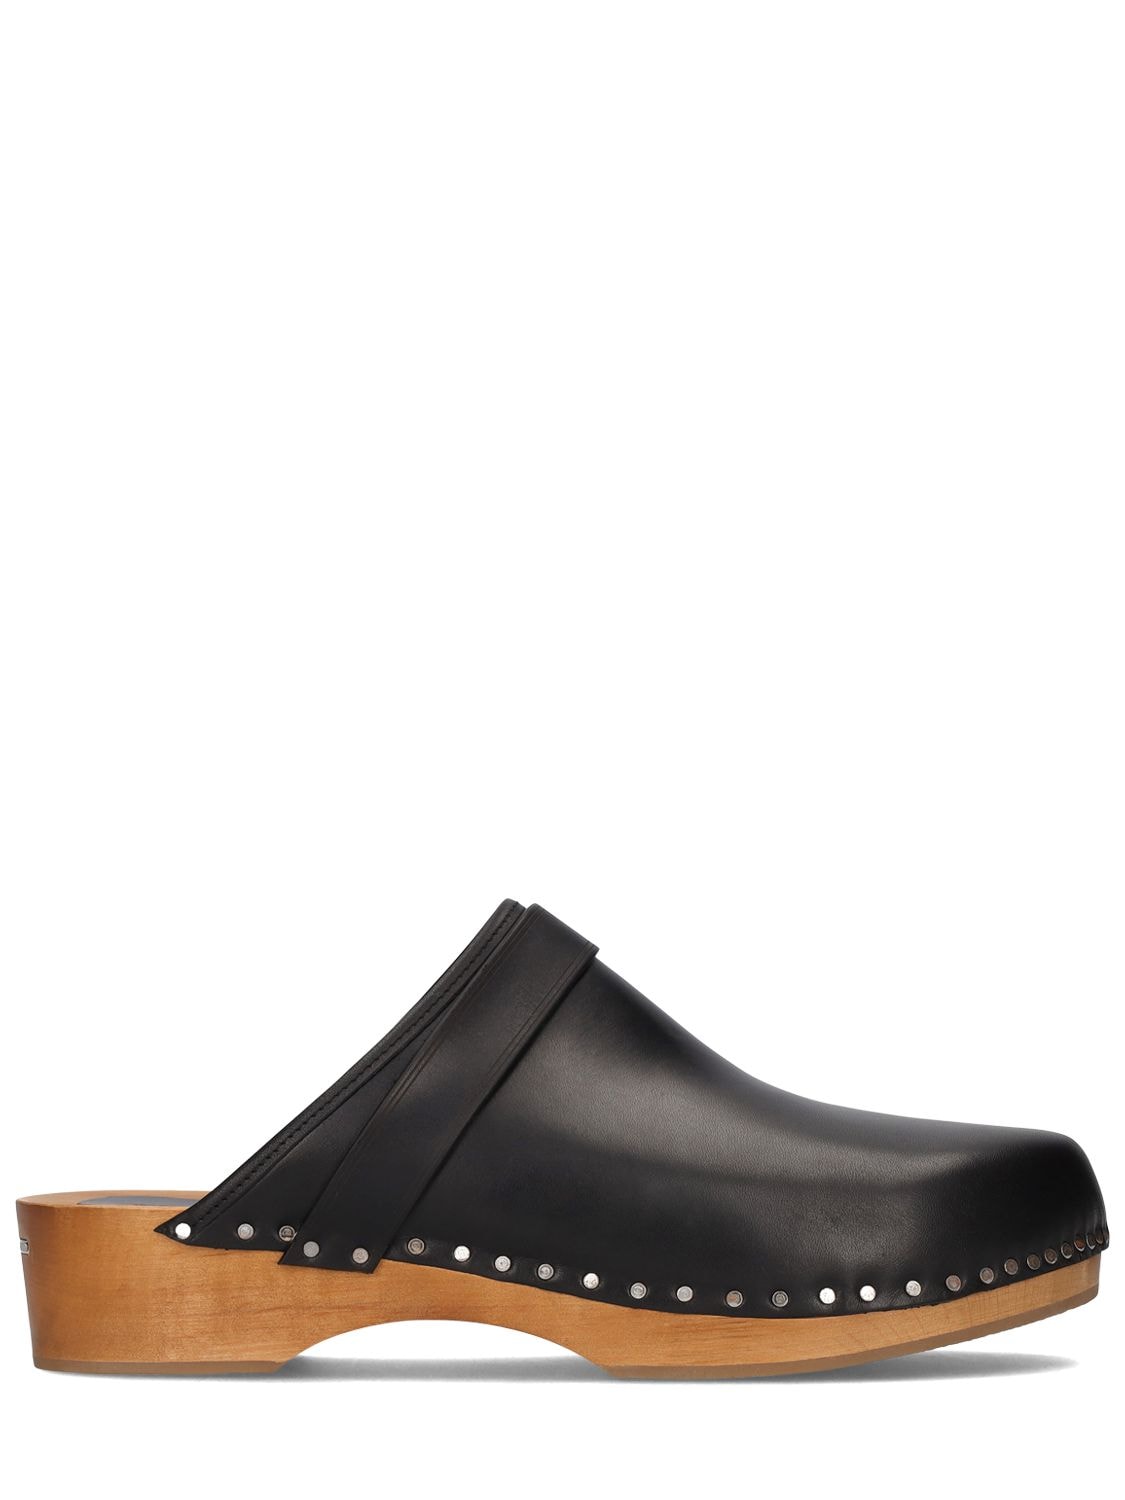 40mm Thalie Leather Clogs